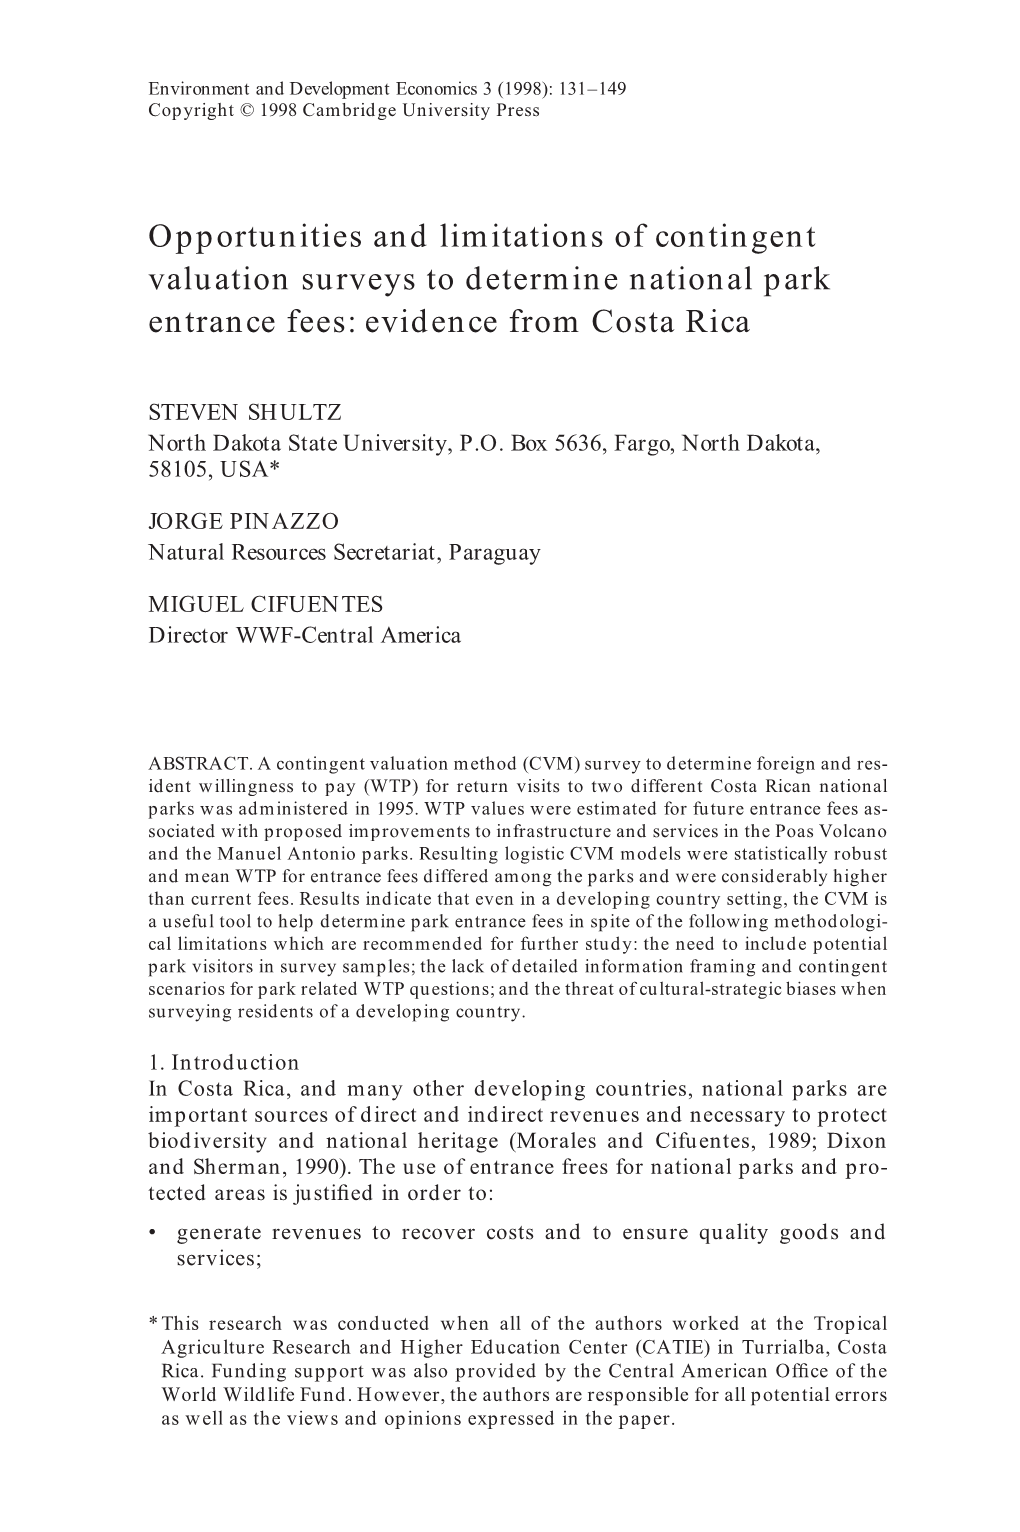 Opportunities and Limitations of Contingent Valuation Surveys to Determine National Park Entrance Fees: Evidence from Costa Rica